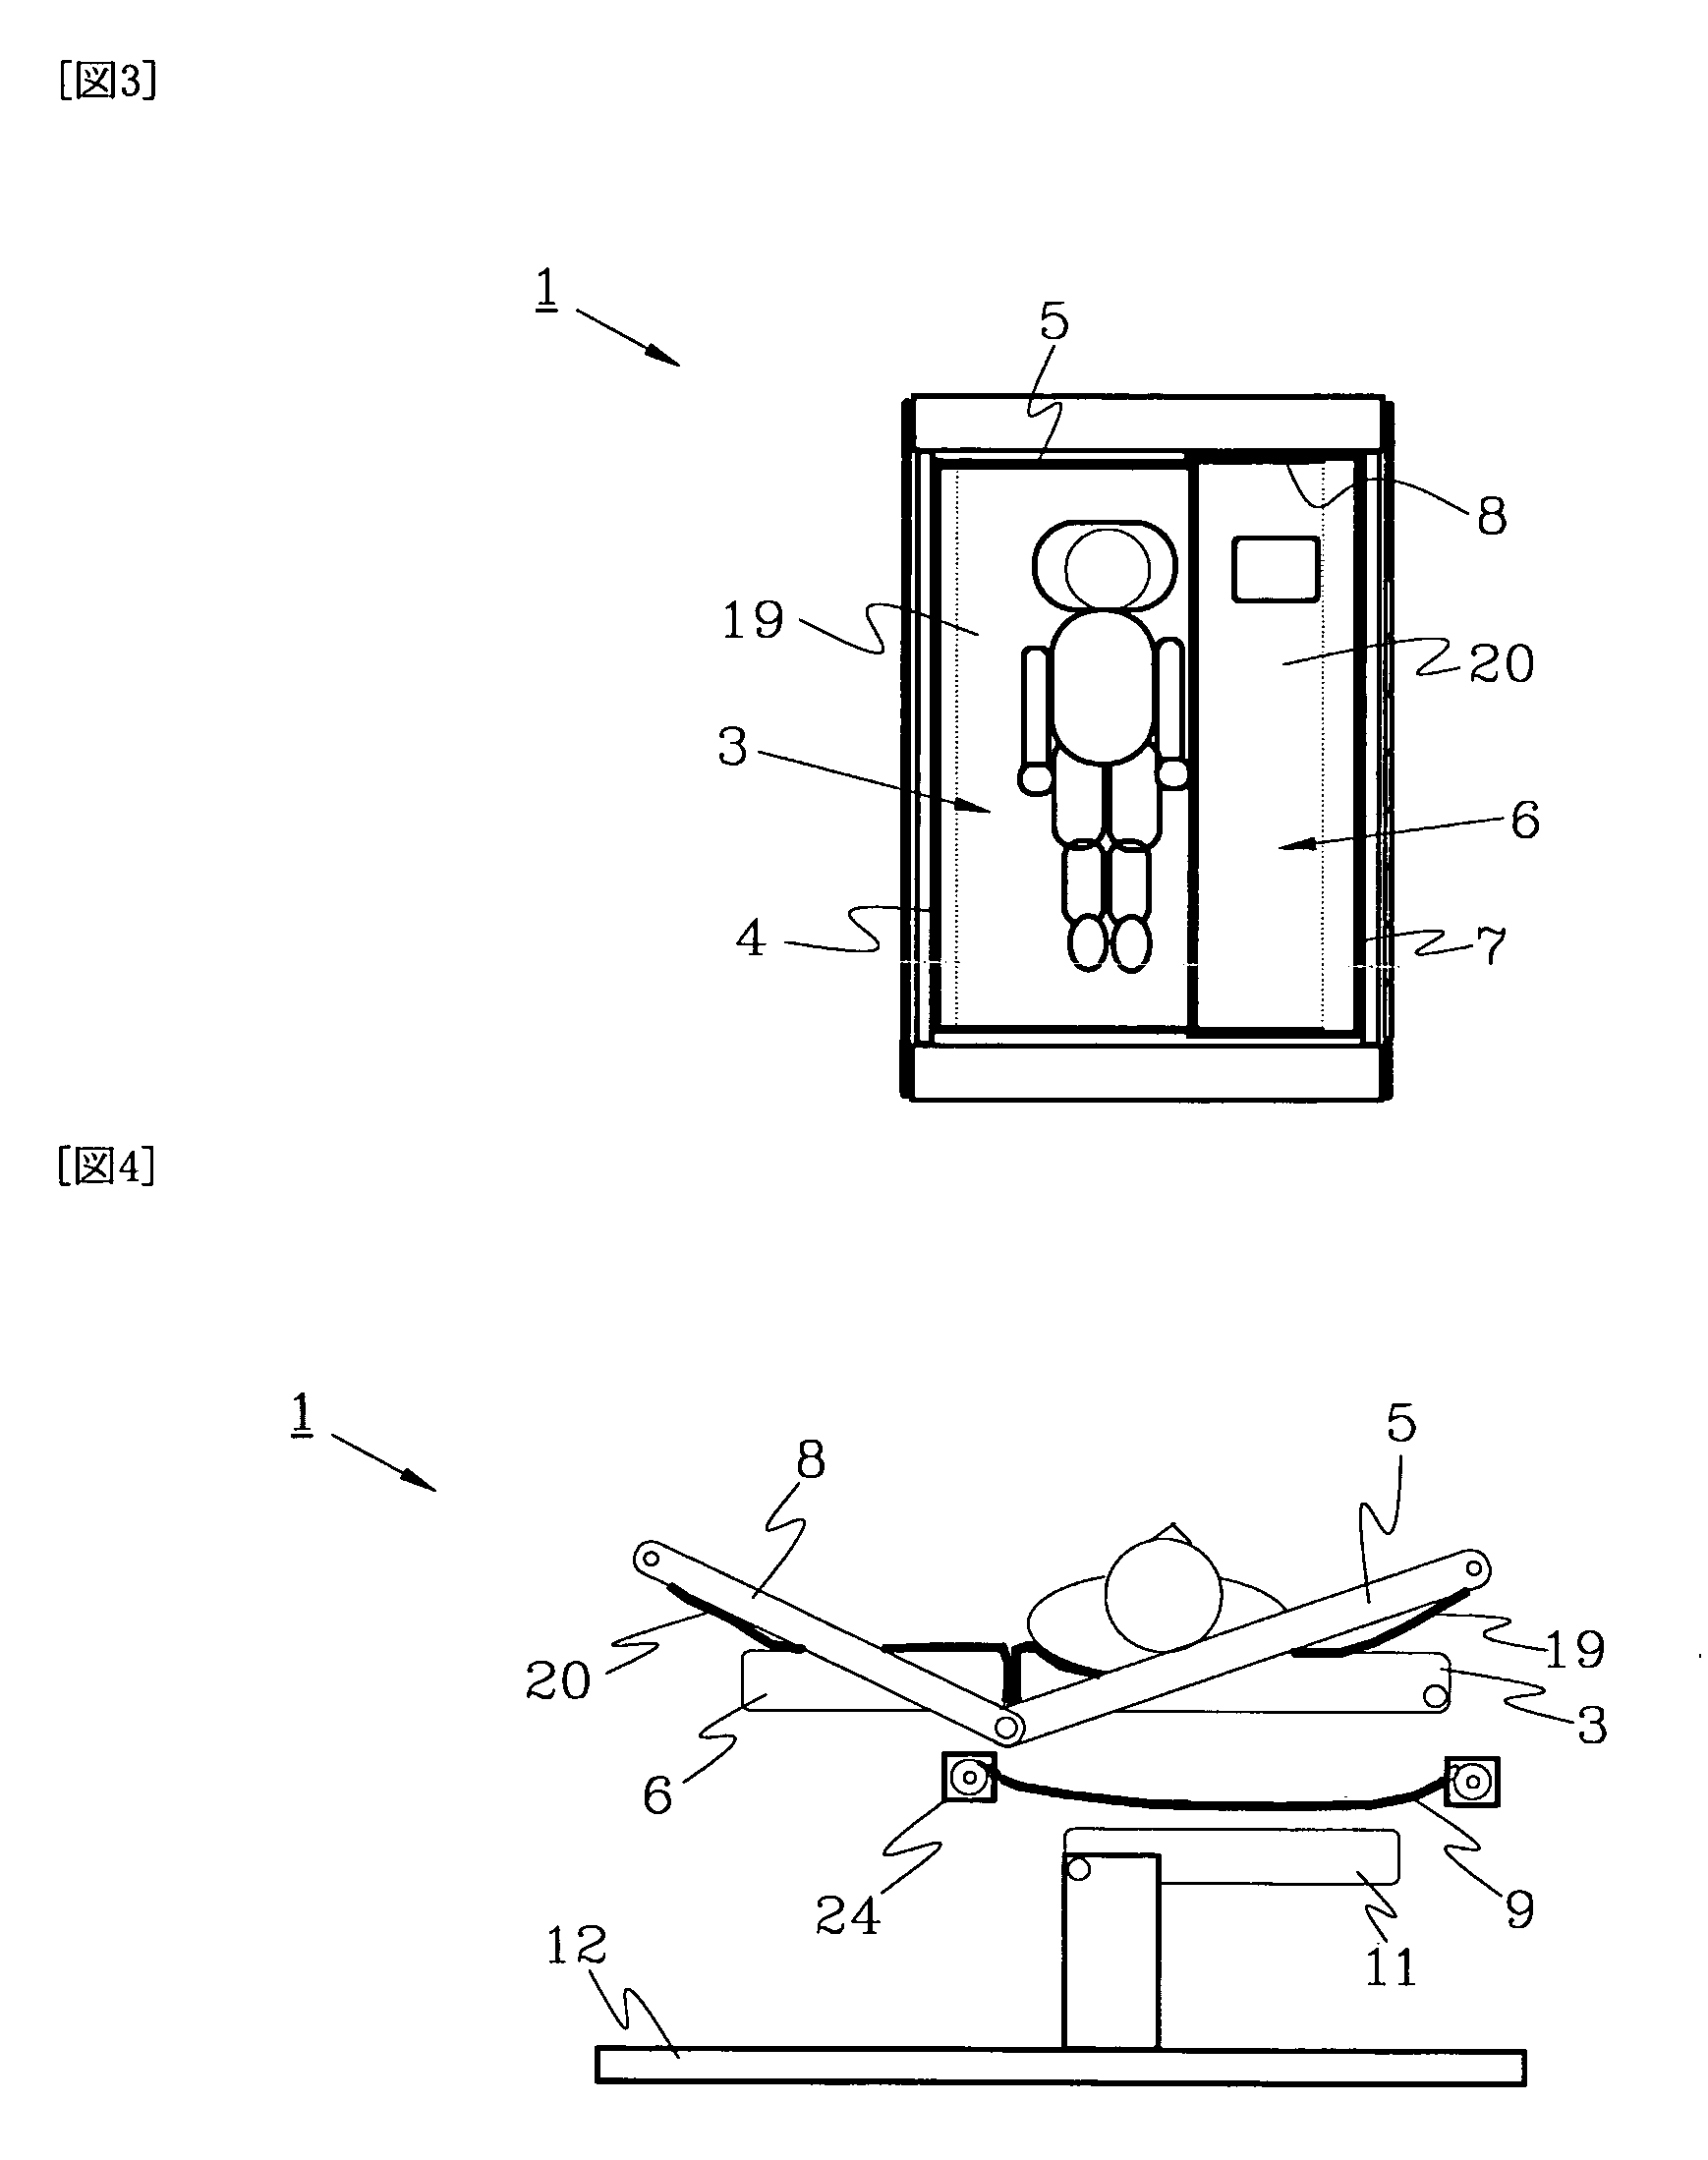 Bed, and method for transferring care-needing person from the bed